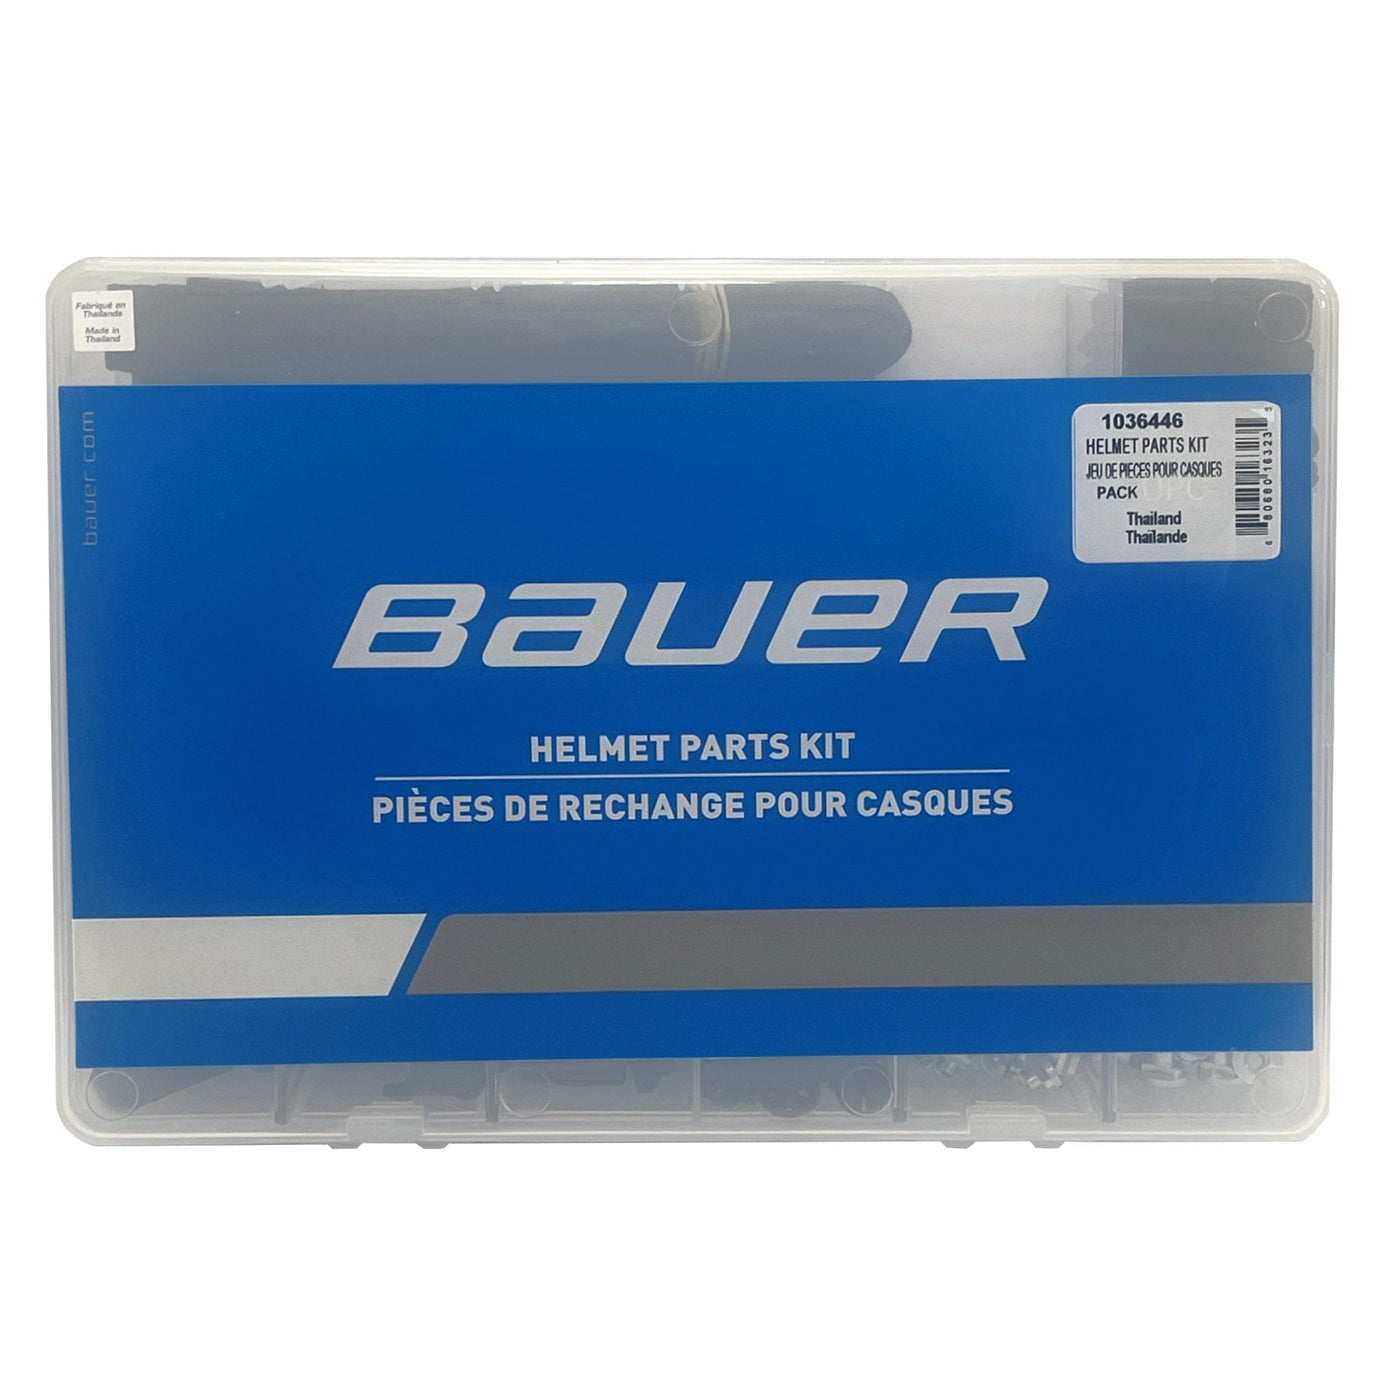 Bauer Helmet Parts Kit - The Hockey Shop Source For Sports